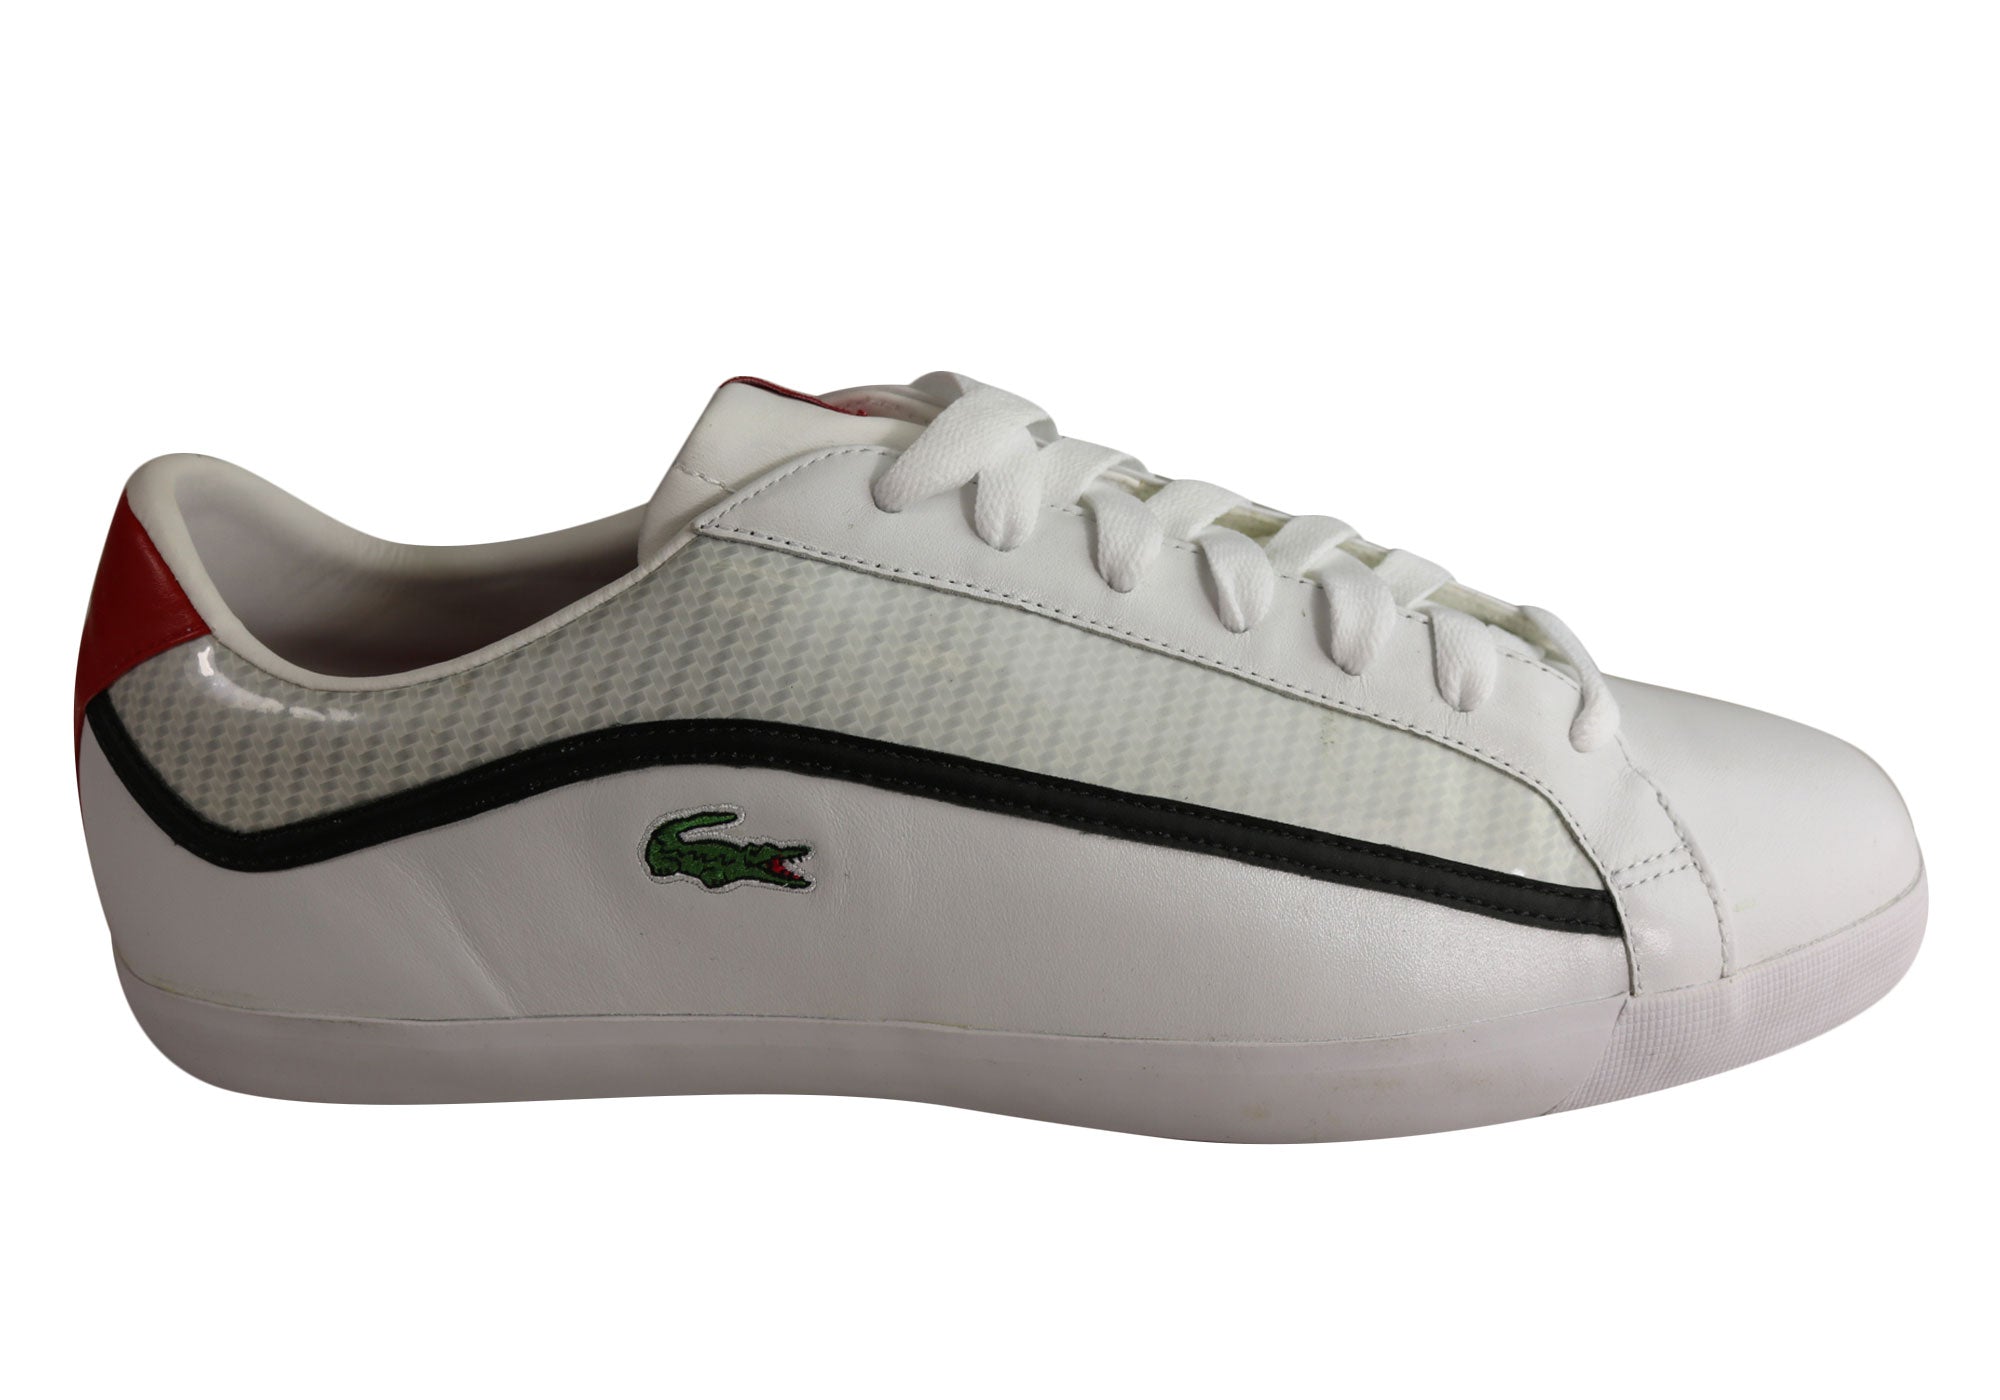 NEW LACOSTE MENS COUR L CF SPM LTH COMFORTABLE LACE UP SNEAKERS SHOES ...